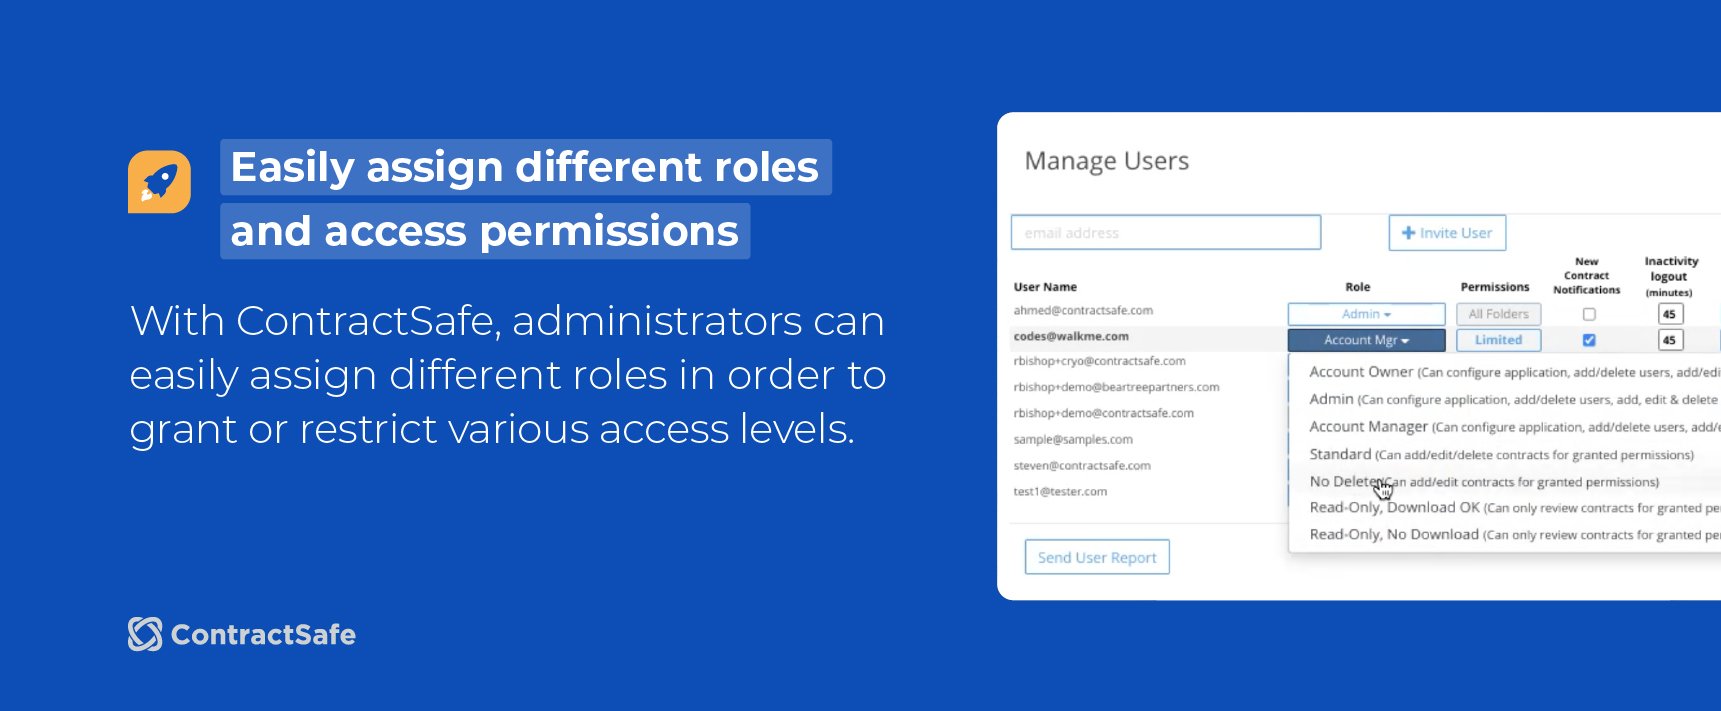 Easily assign different roles and access permissions. With ContractSafe, administrators can easily assign different roles in order to grant or restrict various access levels.